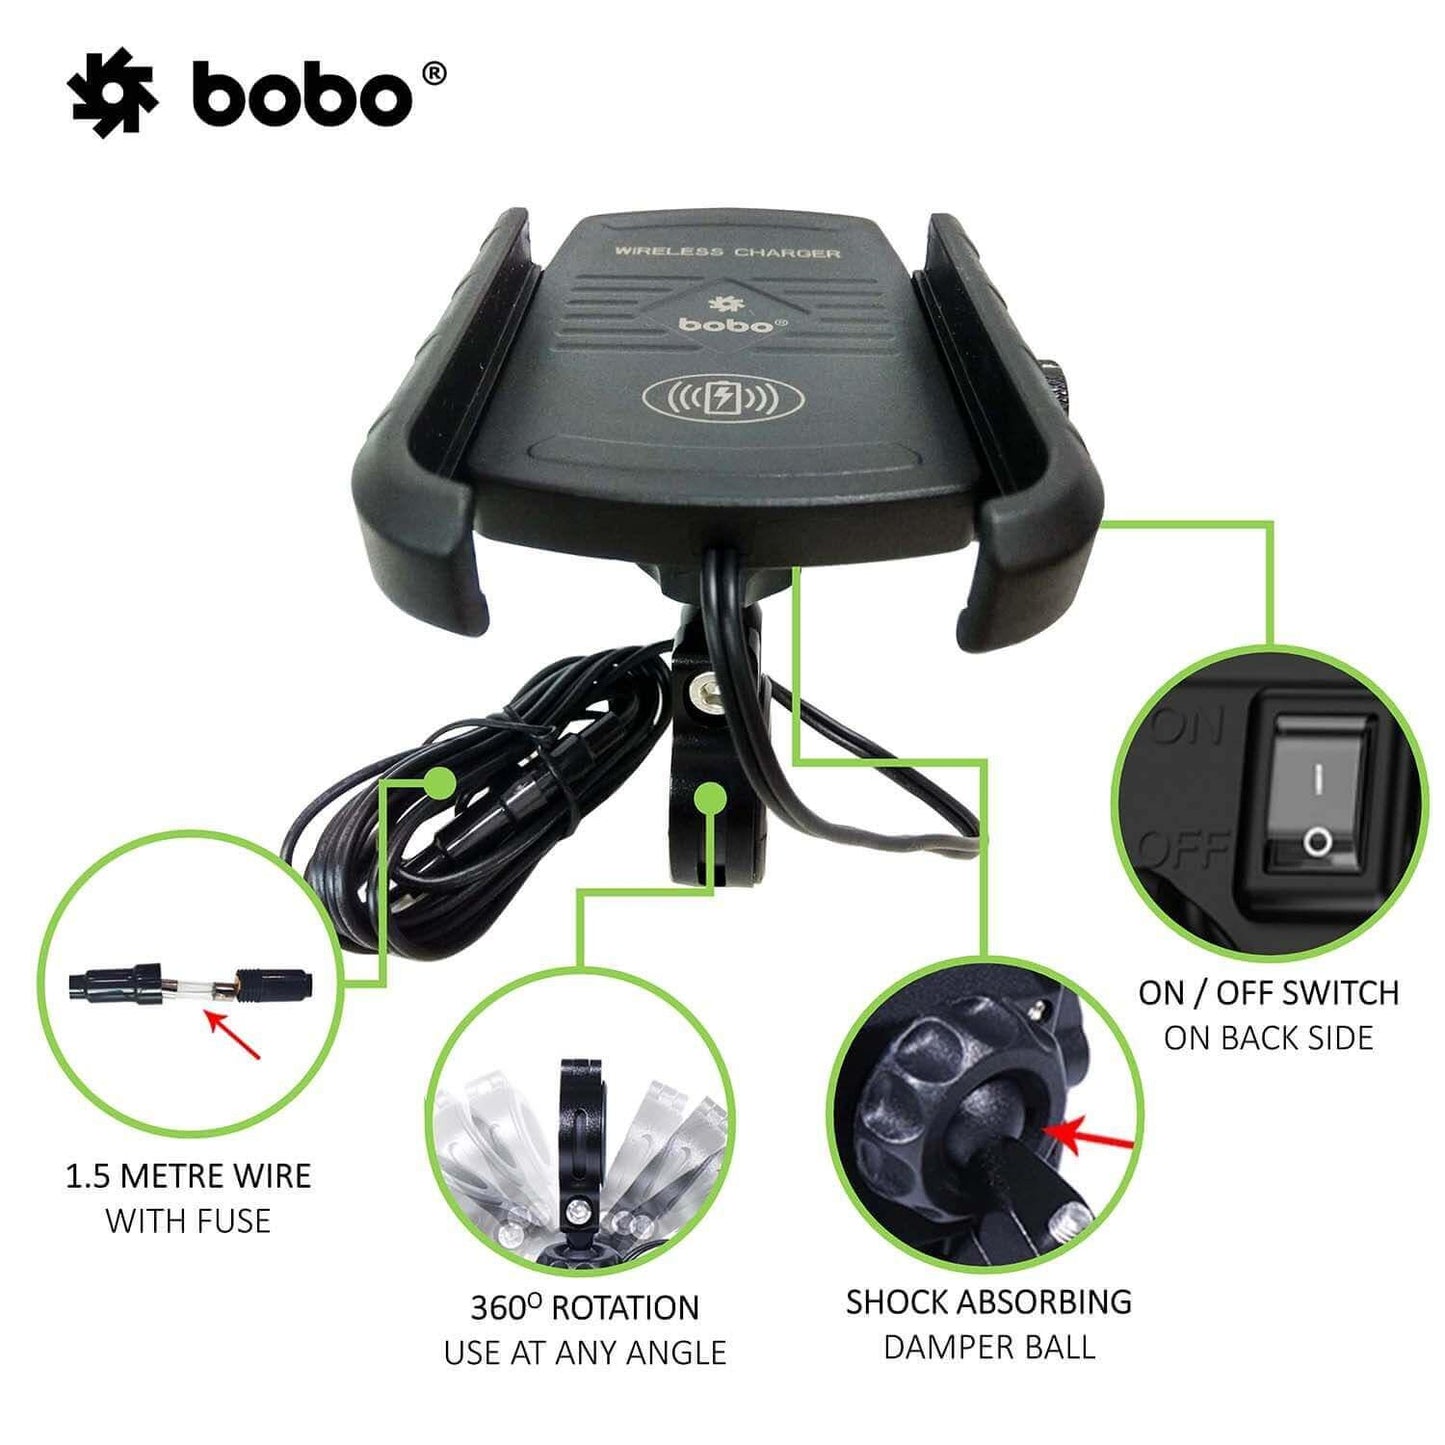 BOBO BM6 Jaw-Grip Bike Phone Holder (with Fast 15W Wireless Charger) Motorcycle Mobile Mount - Moto Modz